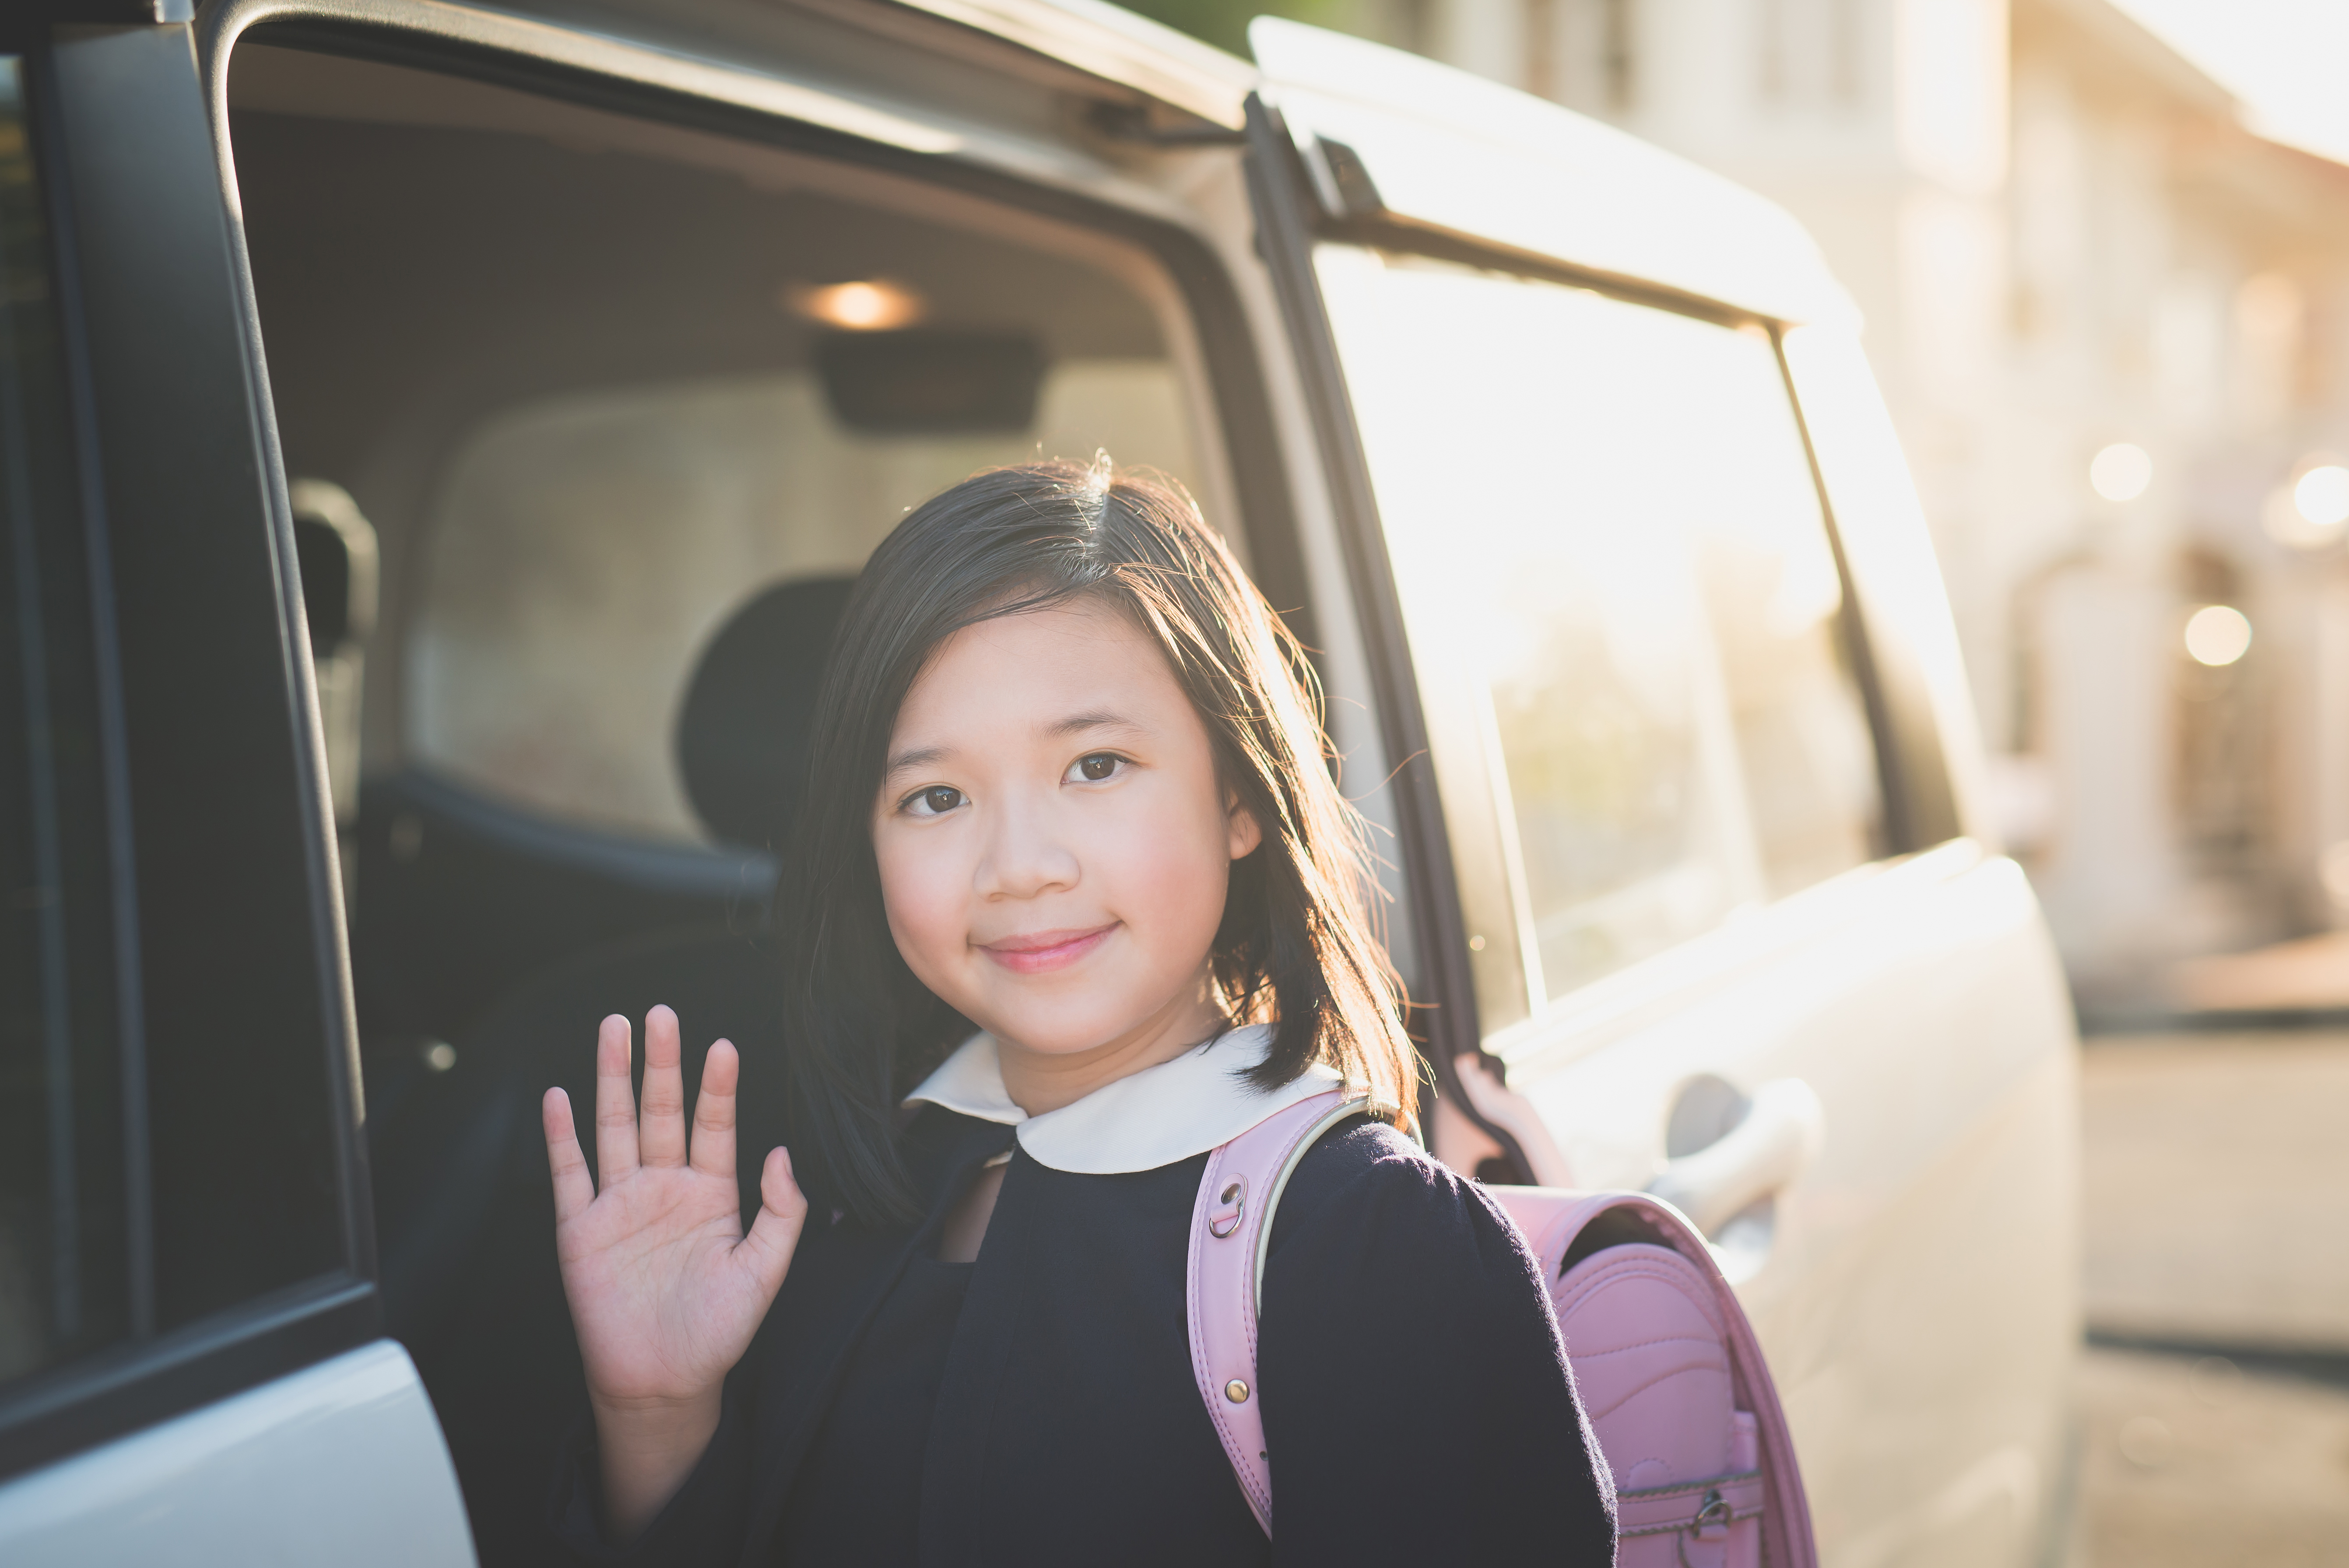 A child waves as she's being dropped off for school.